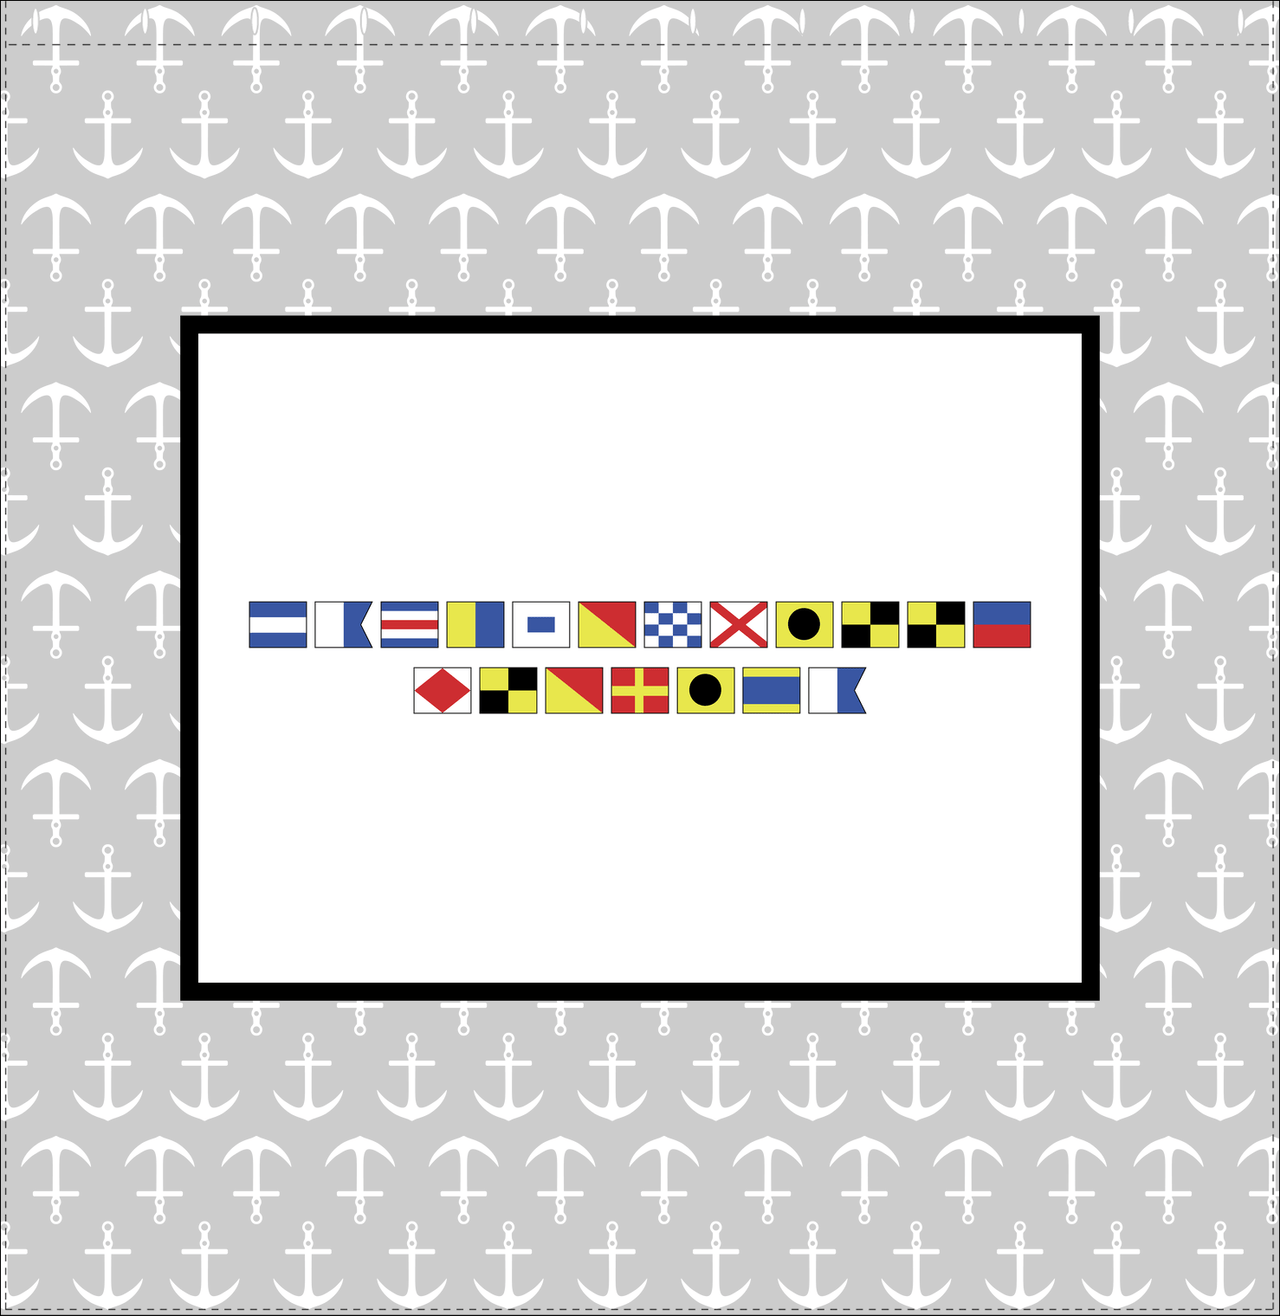 Personalized Nautical Flags Shower Curtain with Anchors - Grey and Black - Flags without Letters - Decorate View